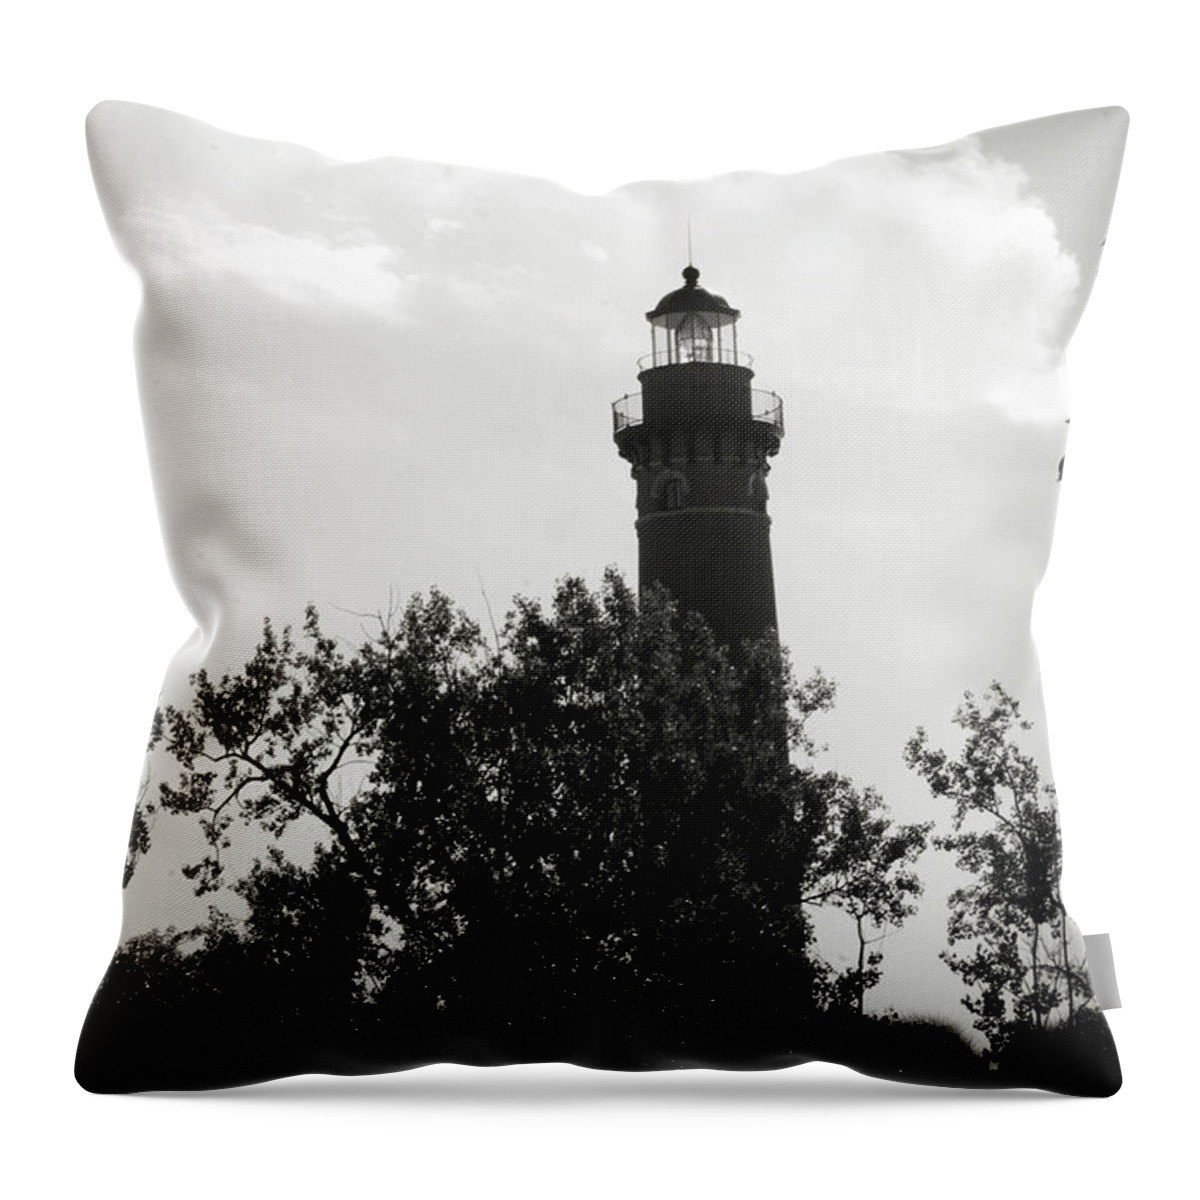 Michigan Lighthouse Throw Pillow featuring the photograph Lighthouse by Michelle Wermuth